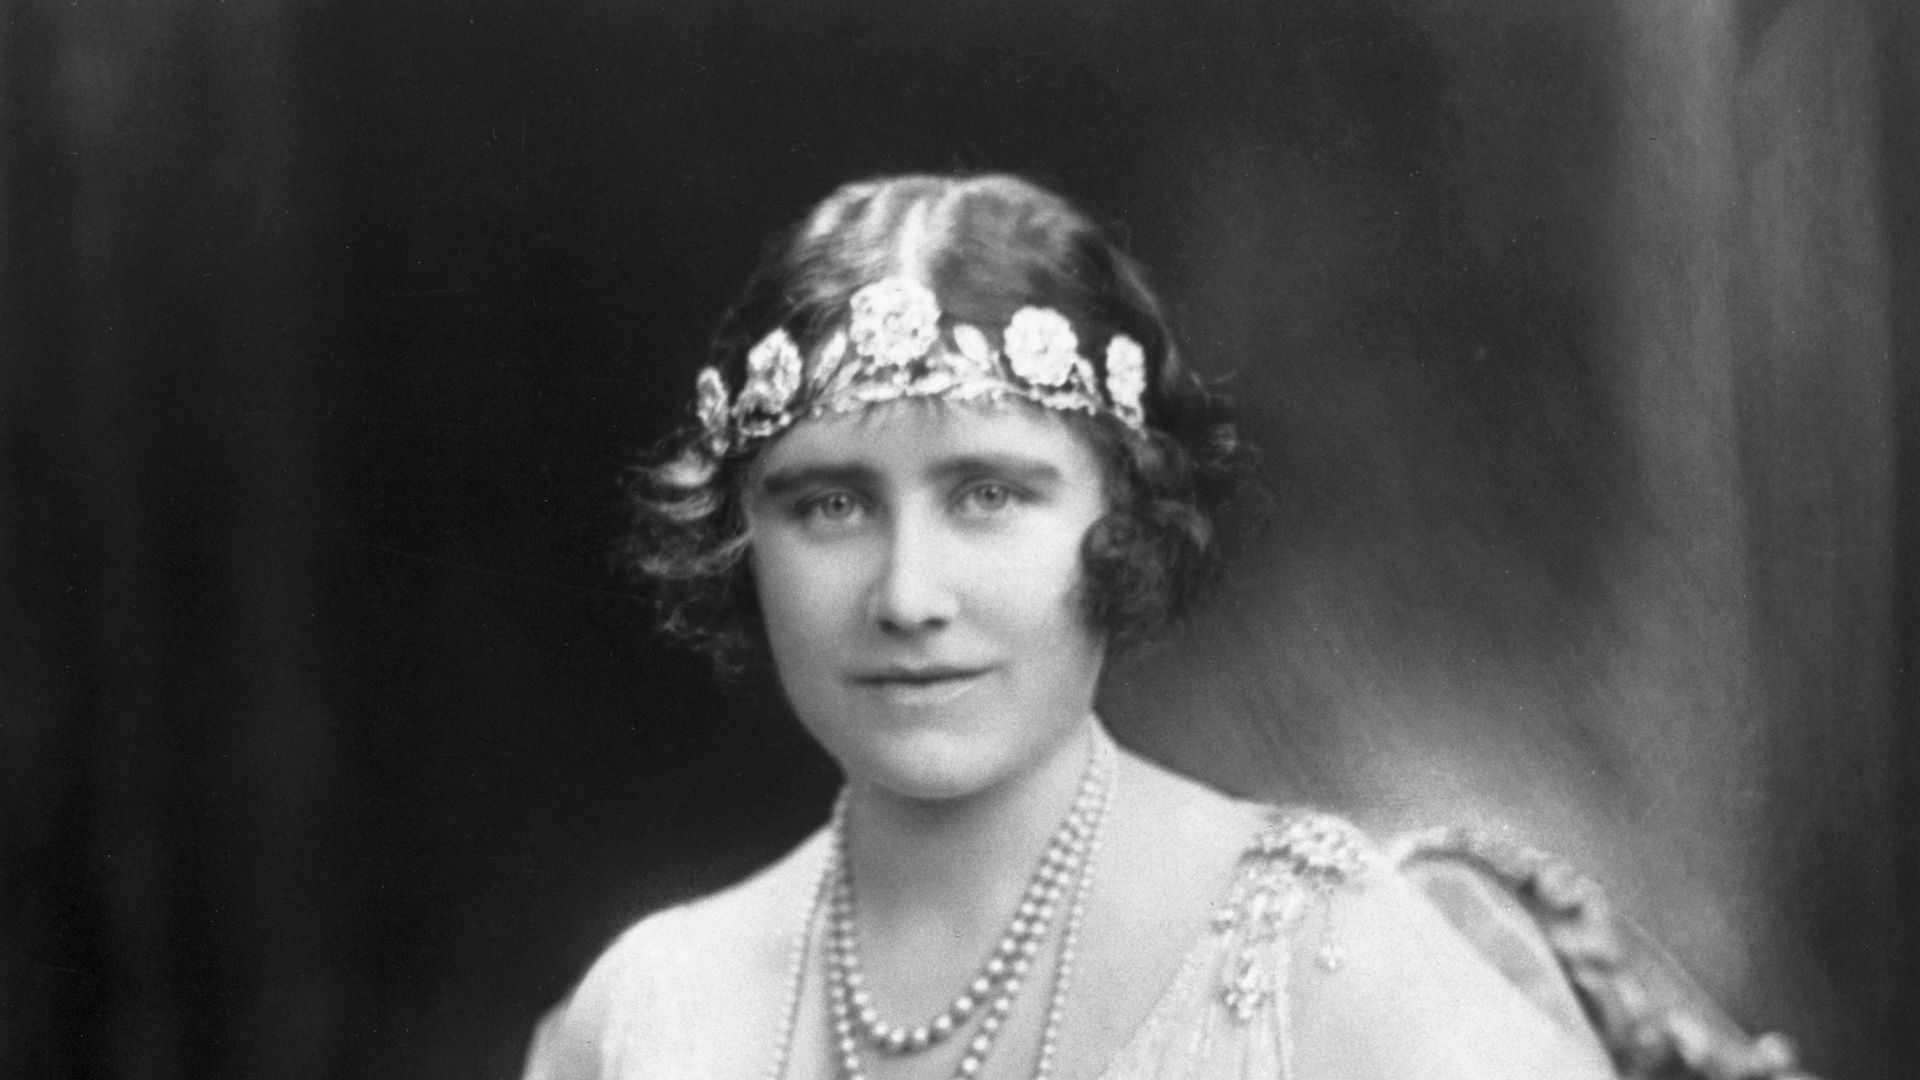 Queen Mother wearing the Strathmore Rose tiara, 1926